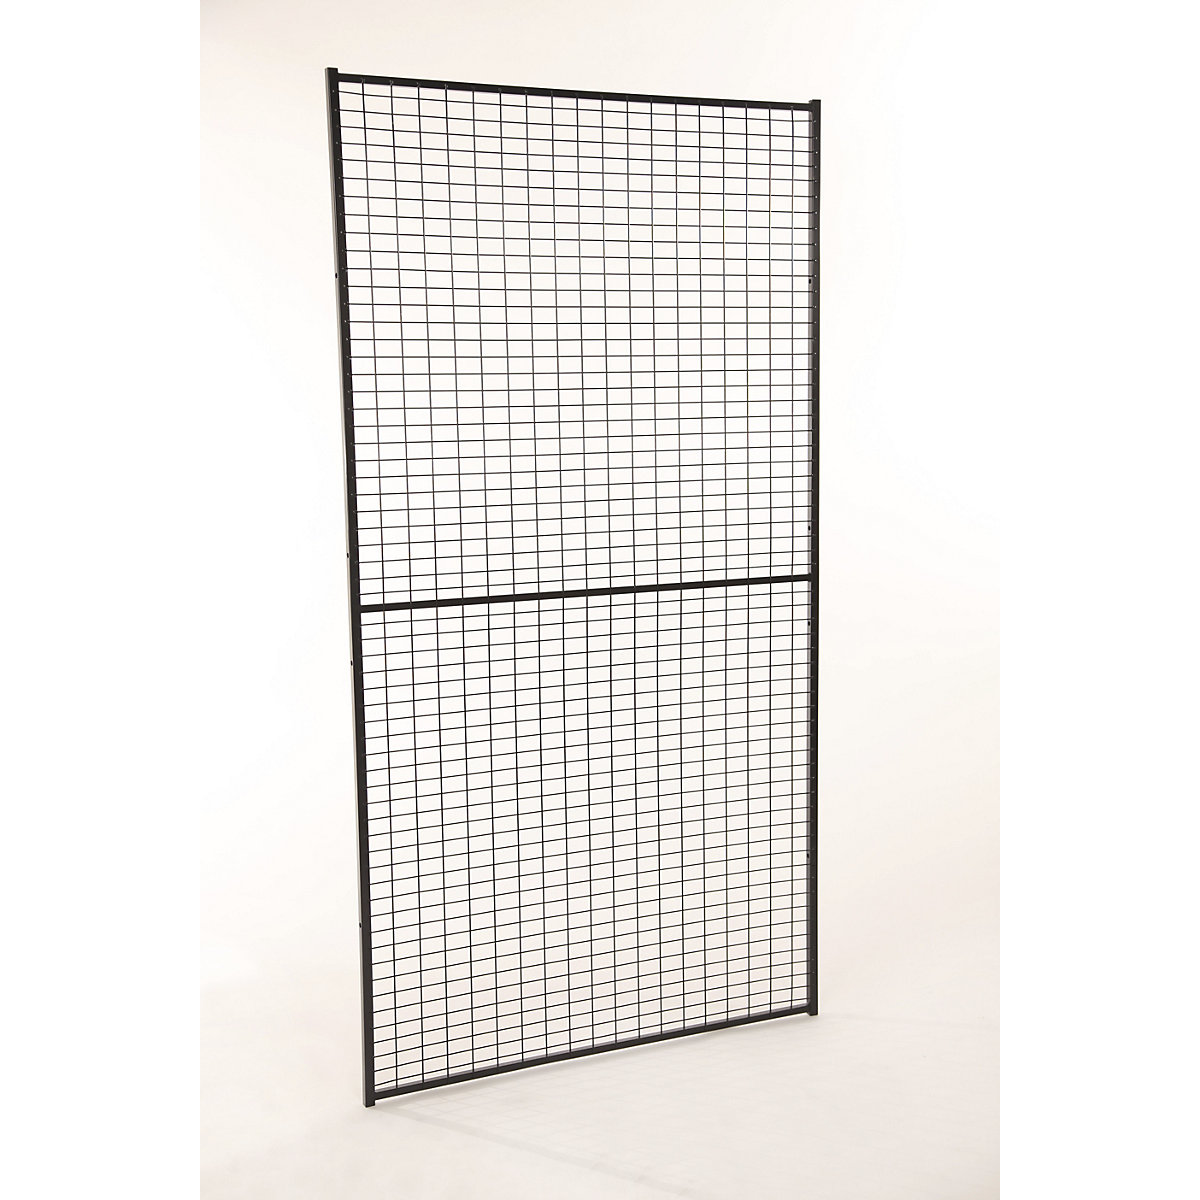 X-GUARD LITE machine protective fencing, wall section – Axelent, height 1900 mm, width 700 mm-5